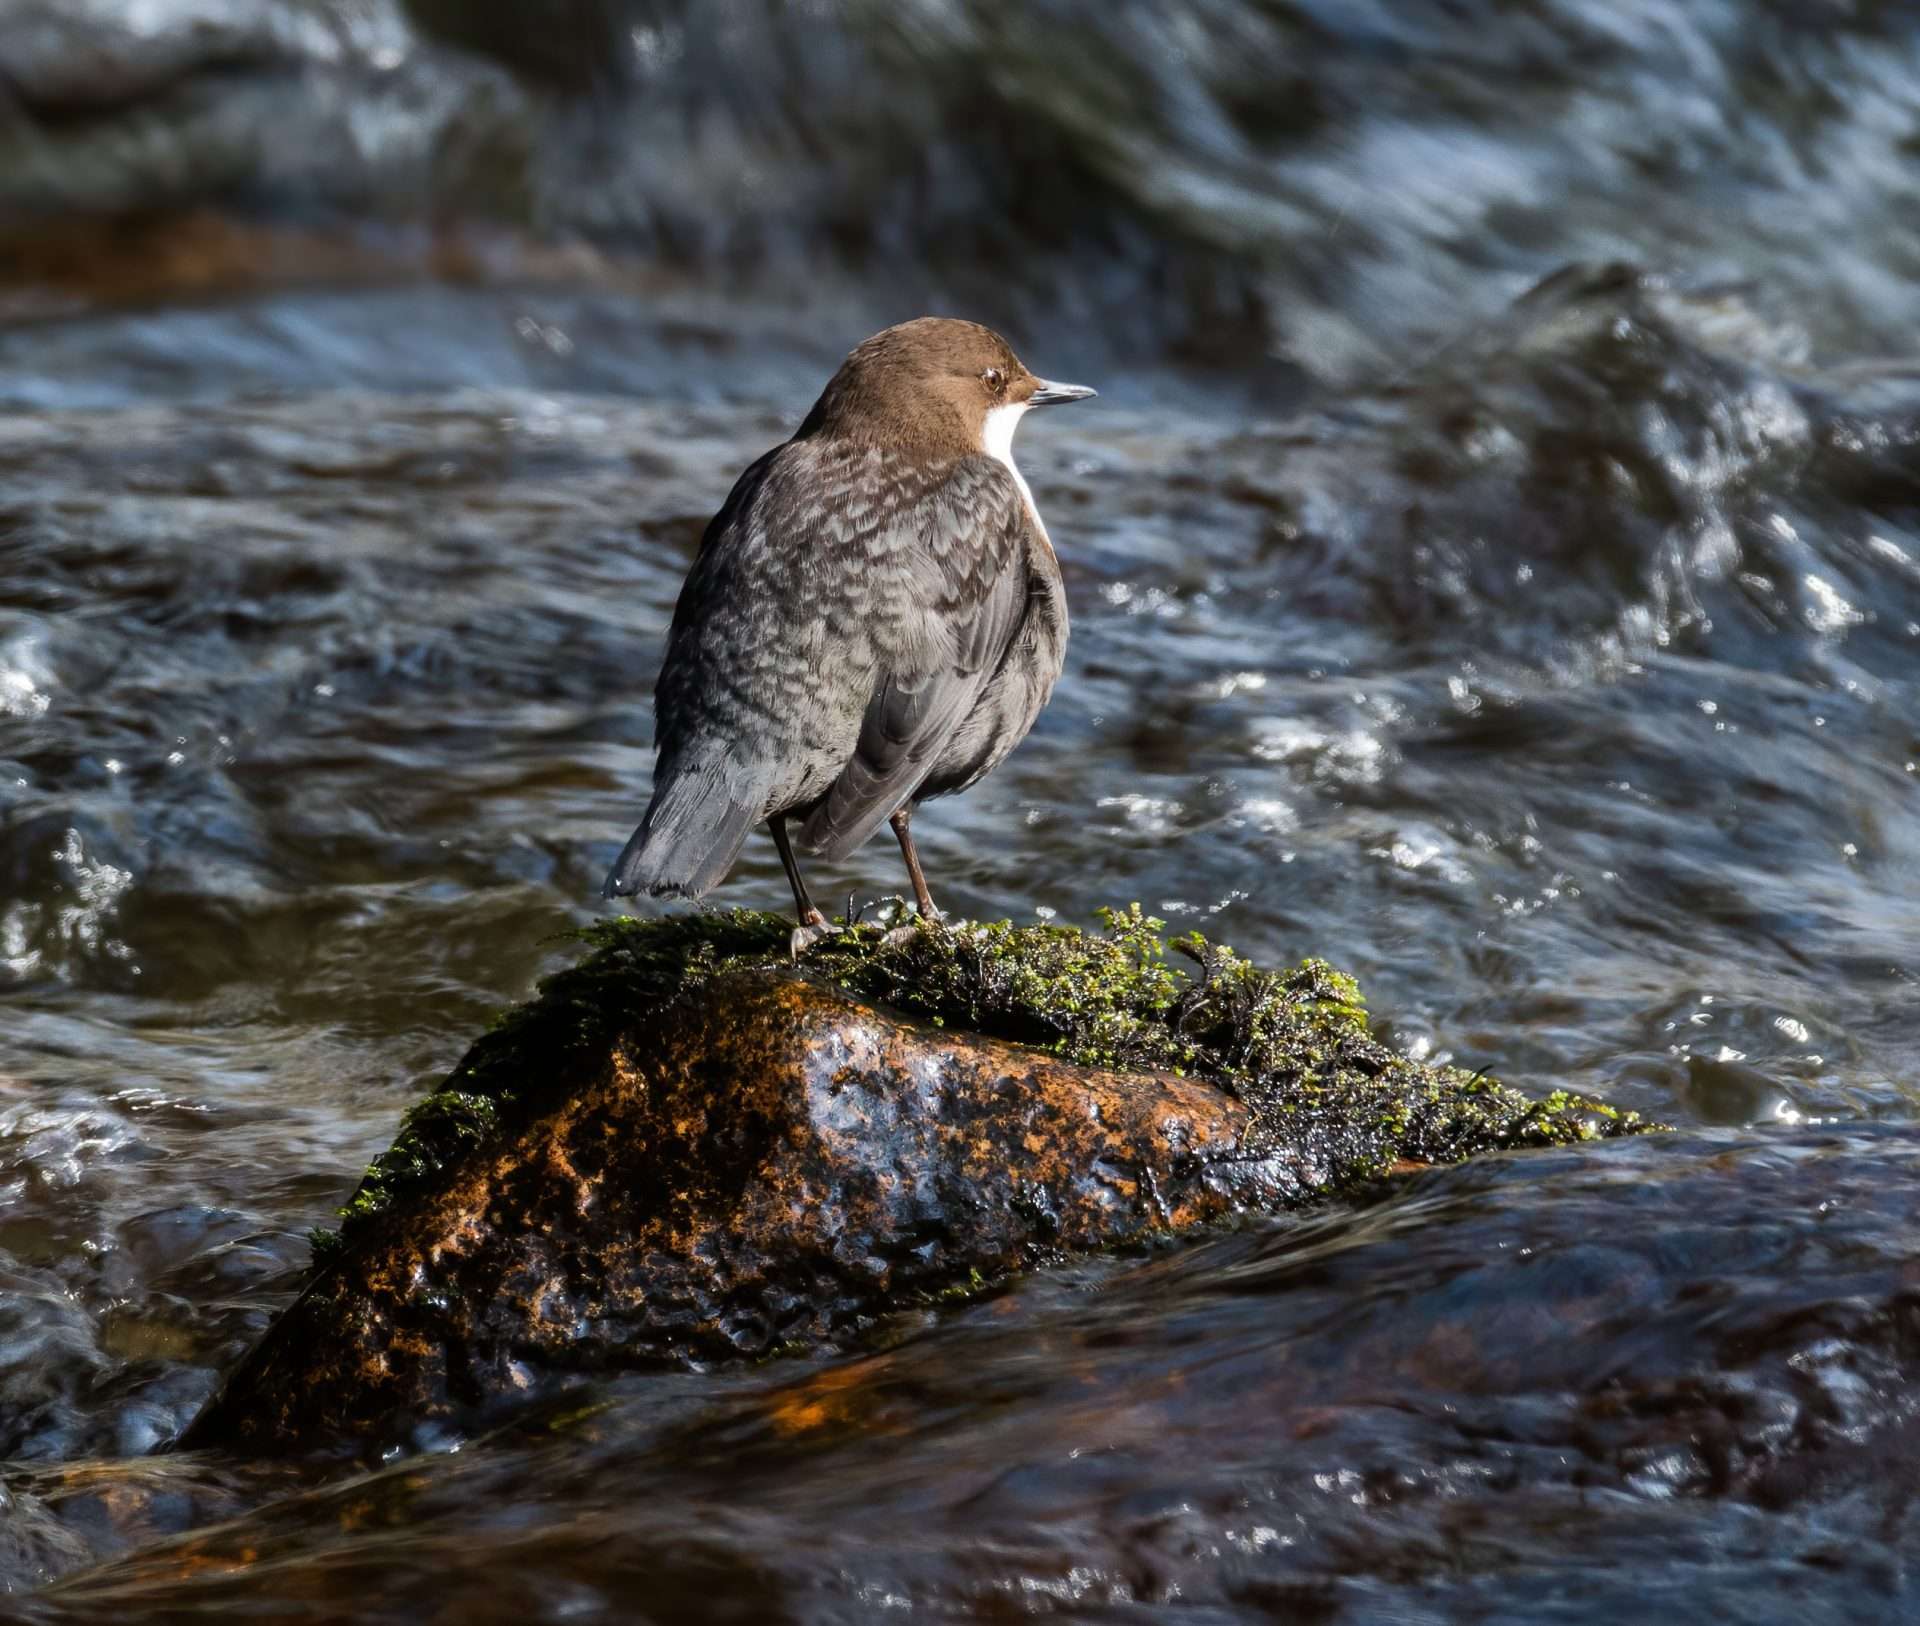 Dipper by Mark Sturman at River Bovey